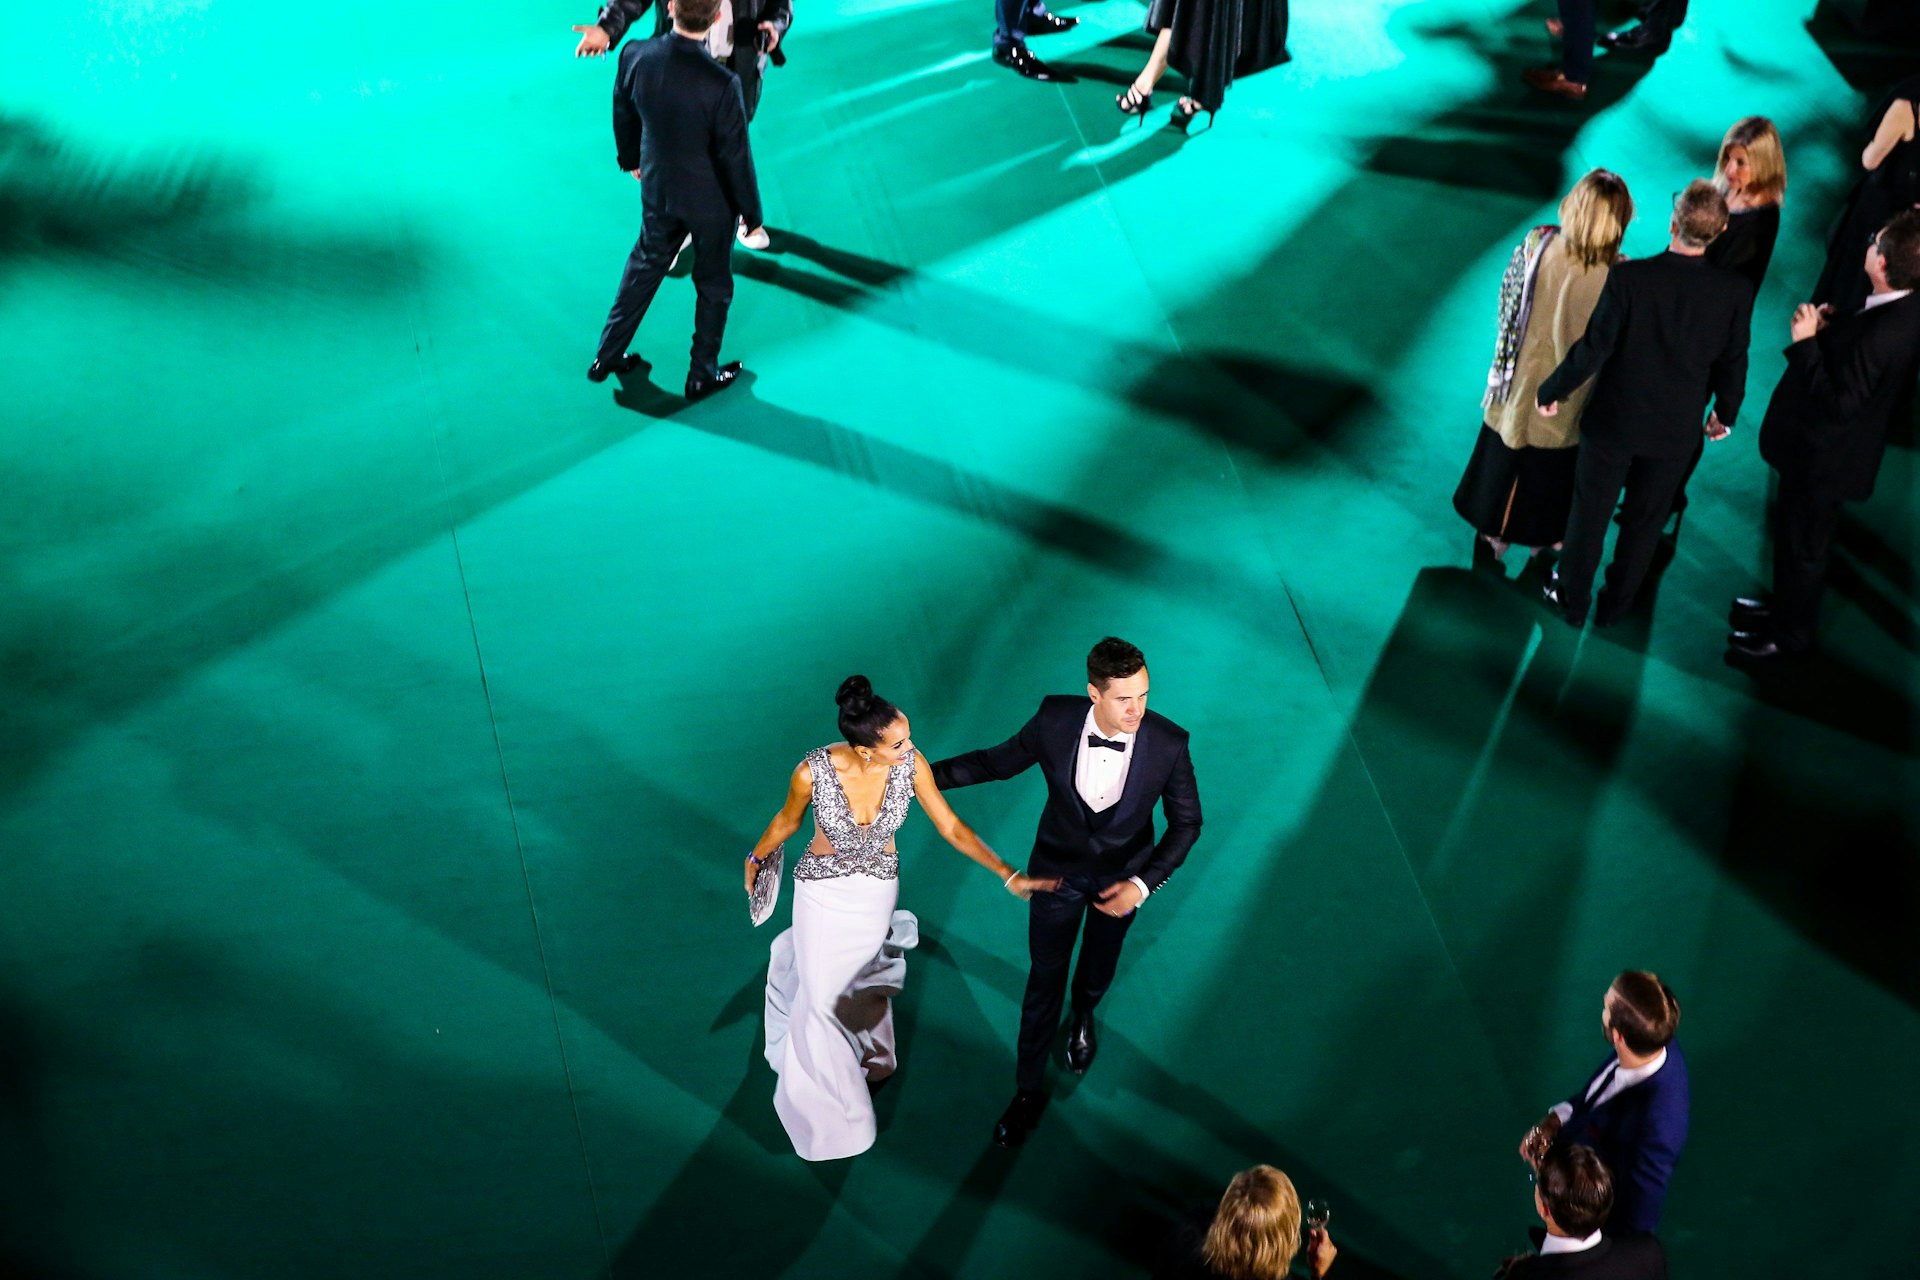 Two ZFF guests, a man and a woman, walking on the Green Carpet.